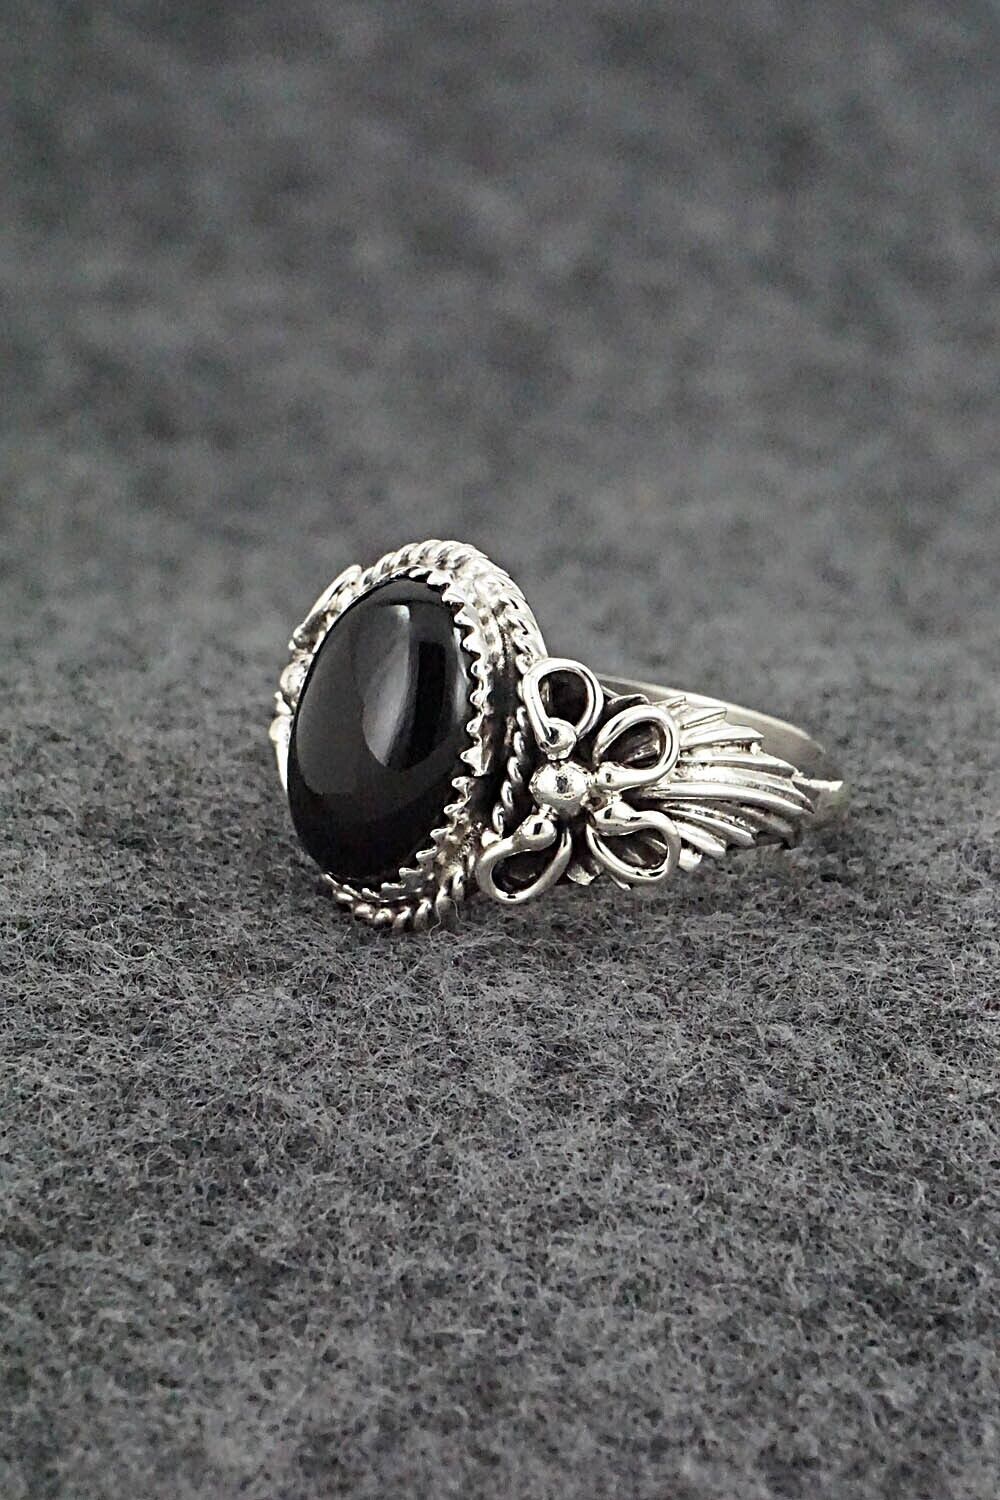 Onyx & Sterling Silver Ring - Jeannette Saunders - Size 10.5